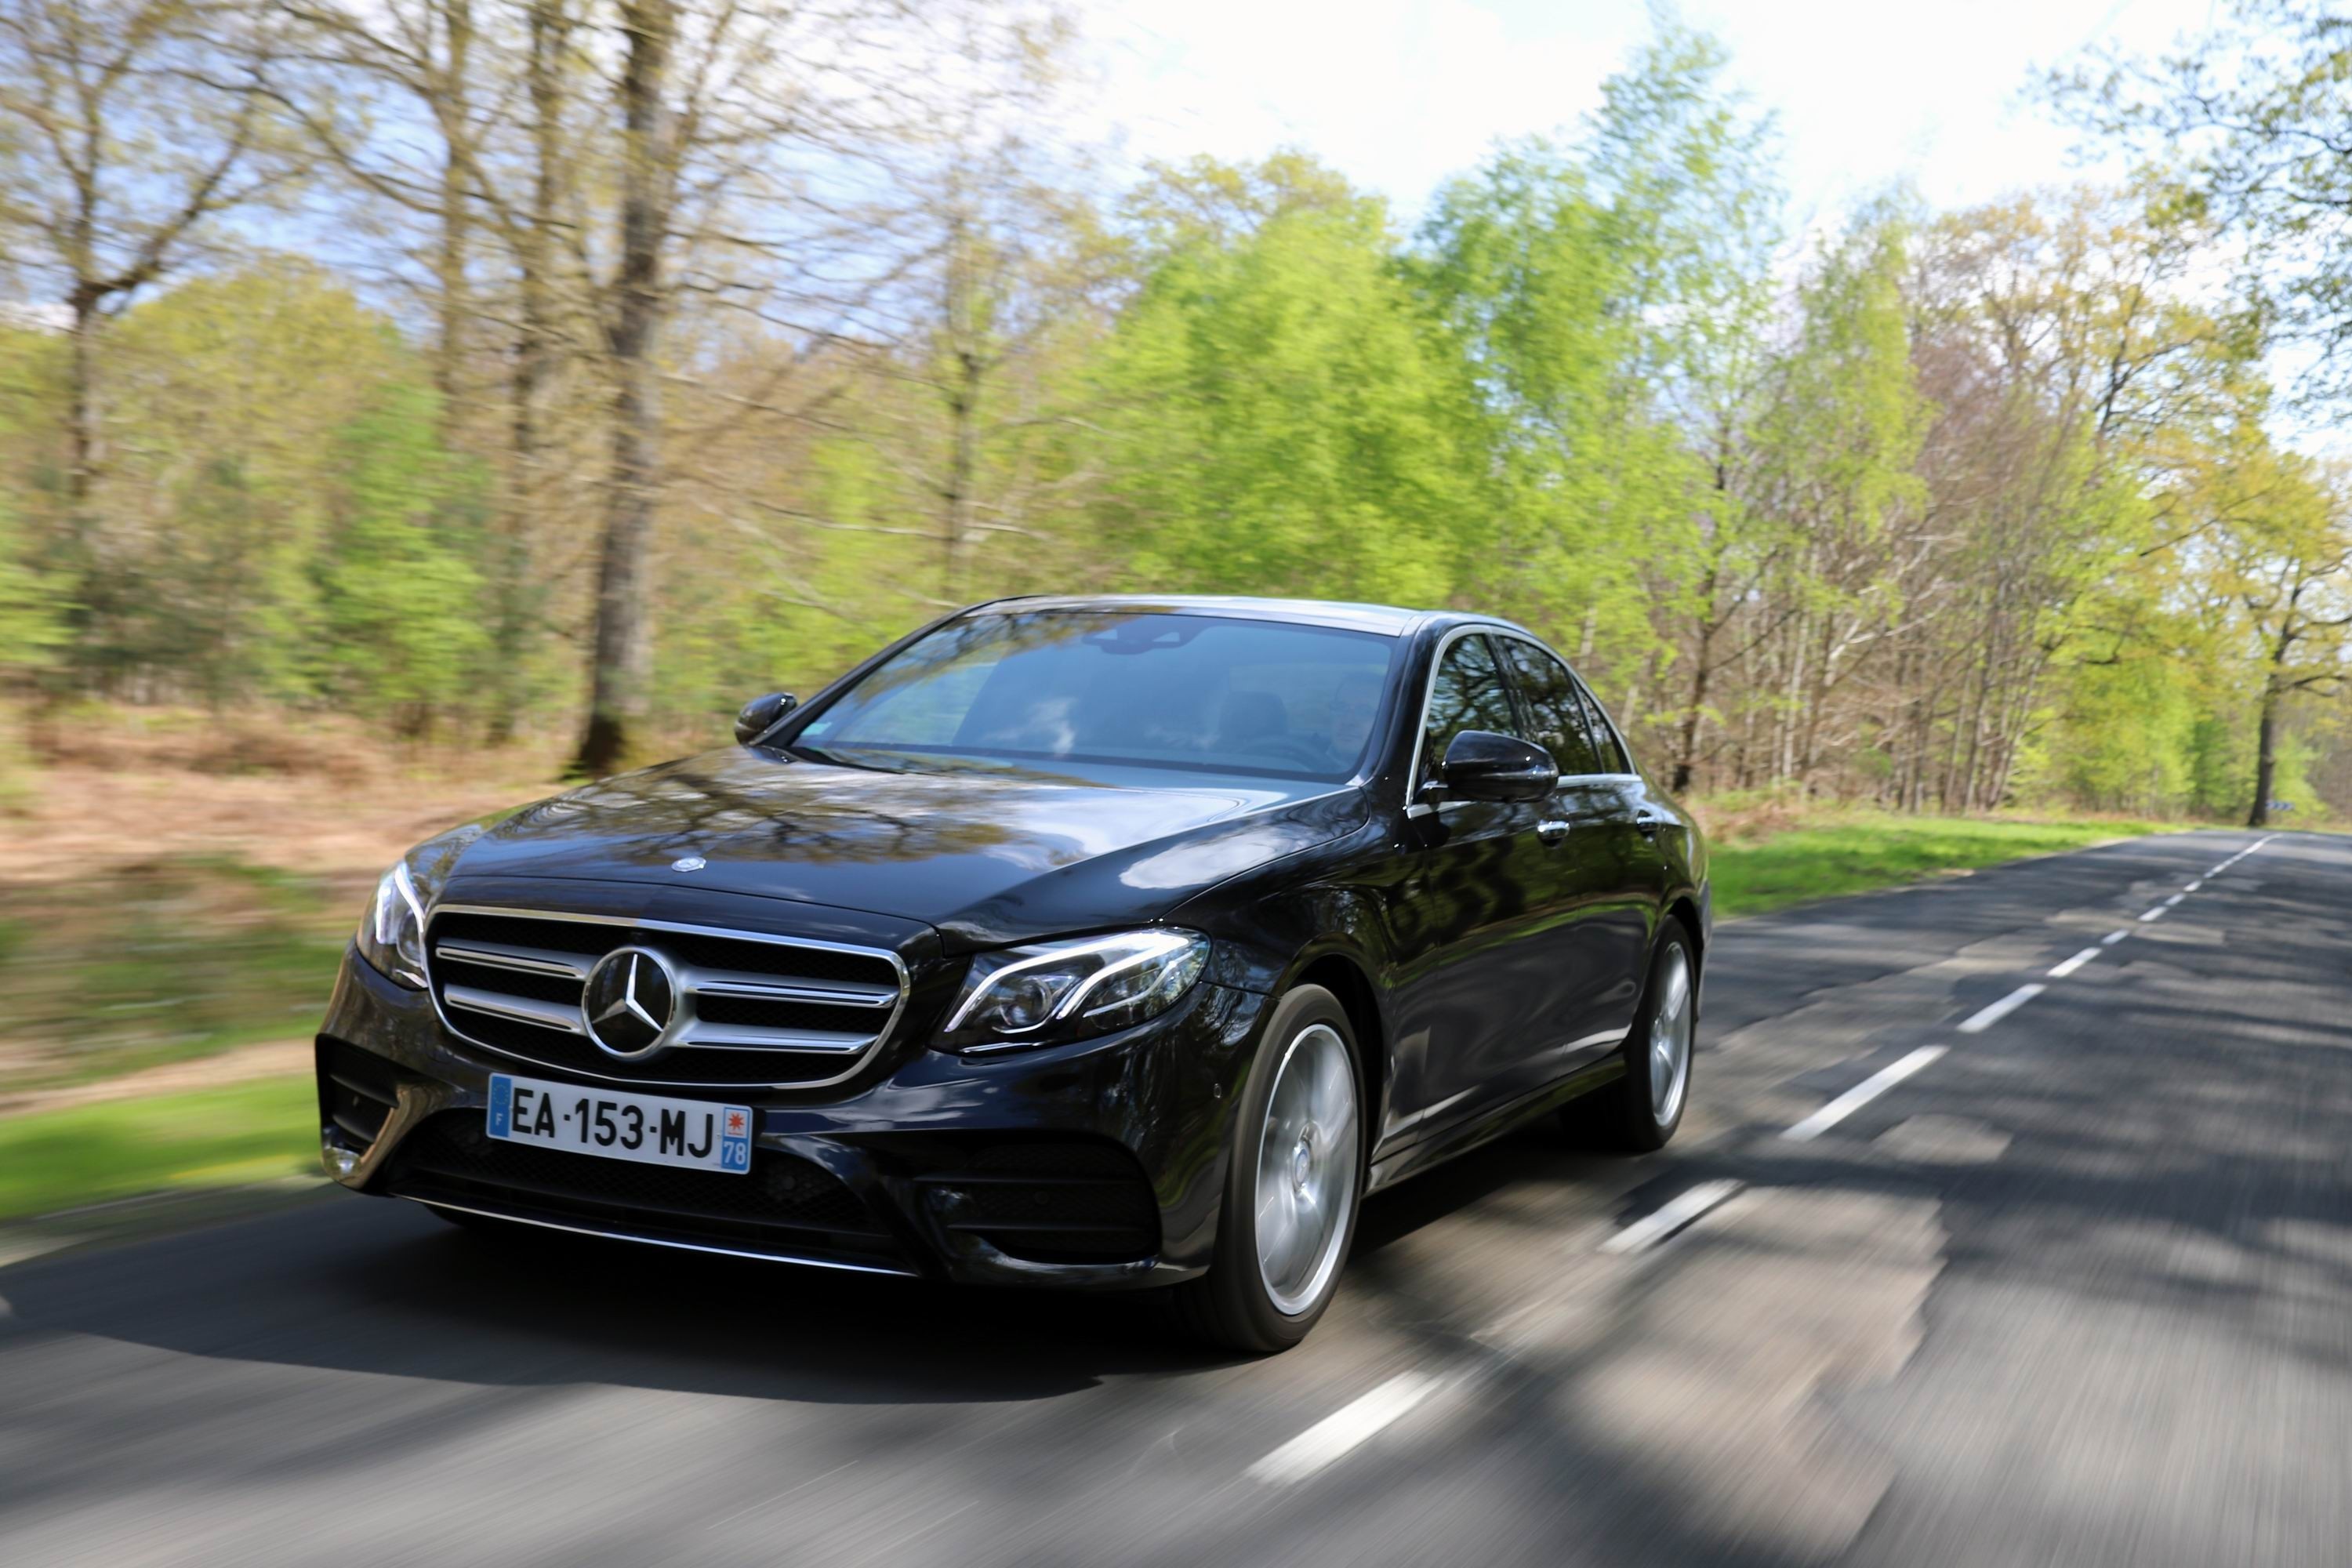 W213 E-Class Updated For 2018 Model Year With Smarter Linguatronic